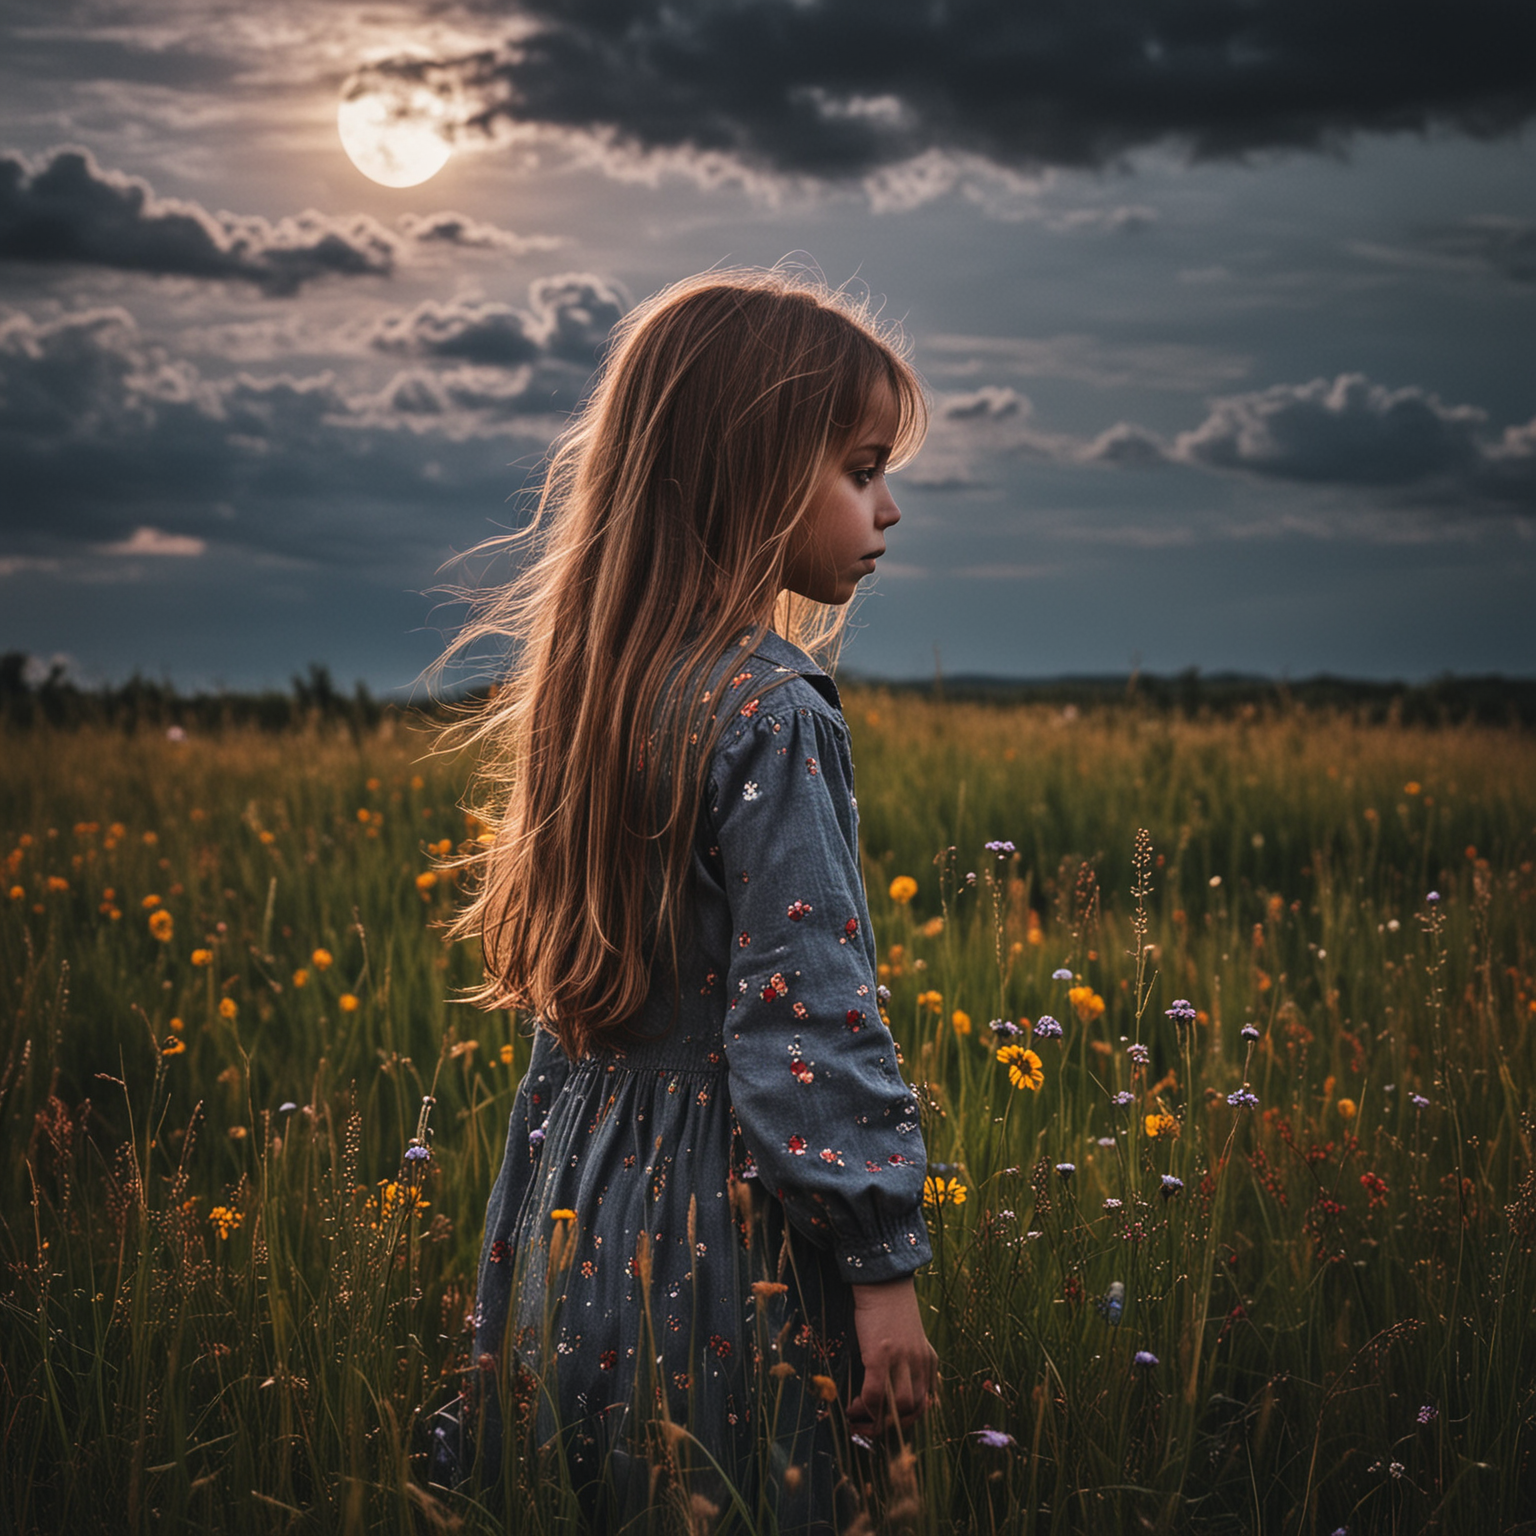 Lonely Child Amidst Tall Grass and Flowers Under Stormy Moonlight